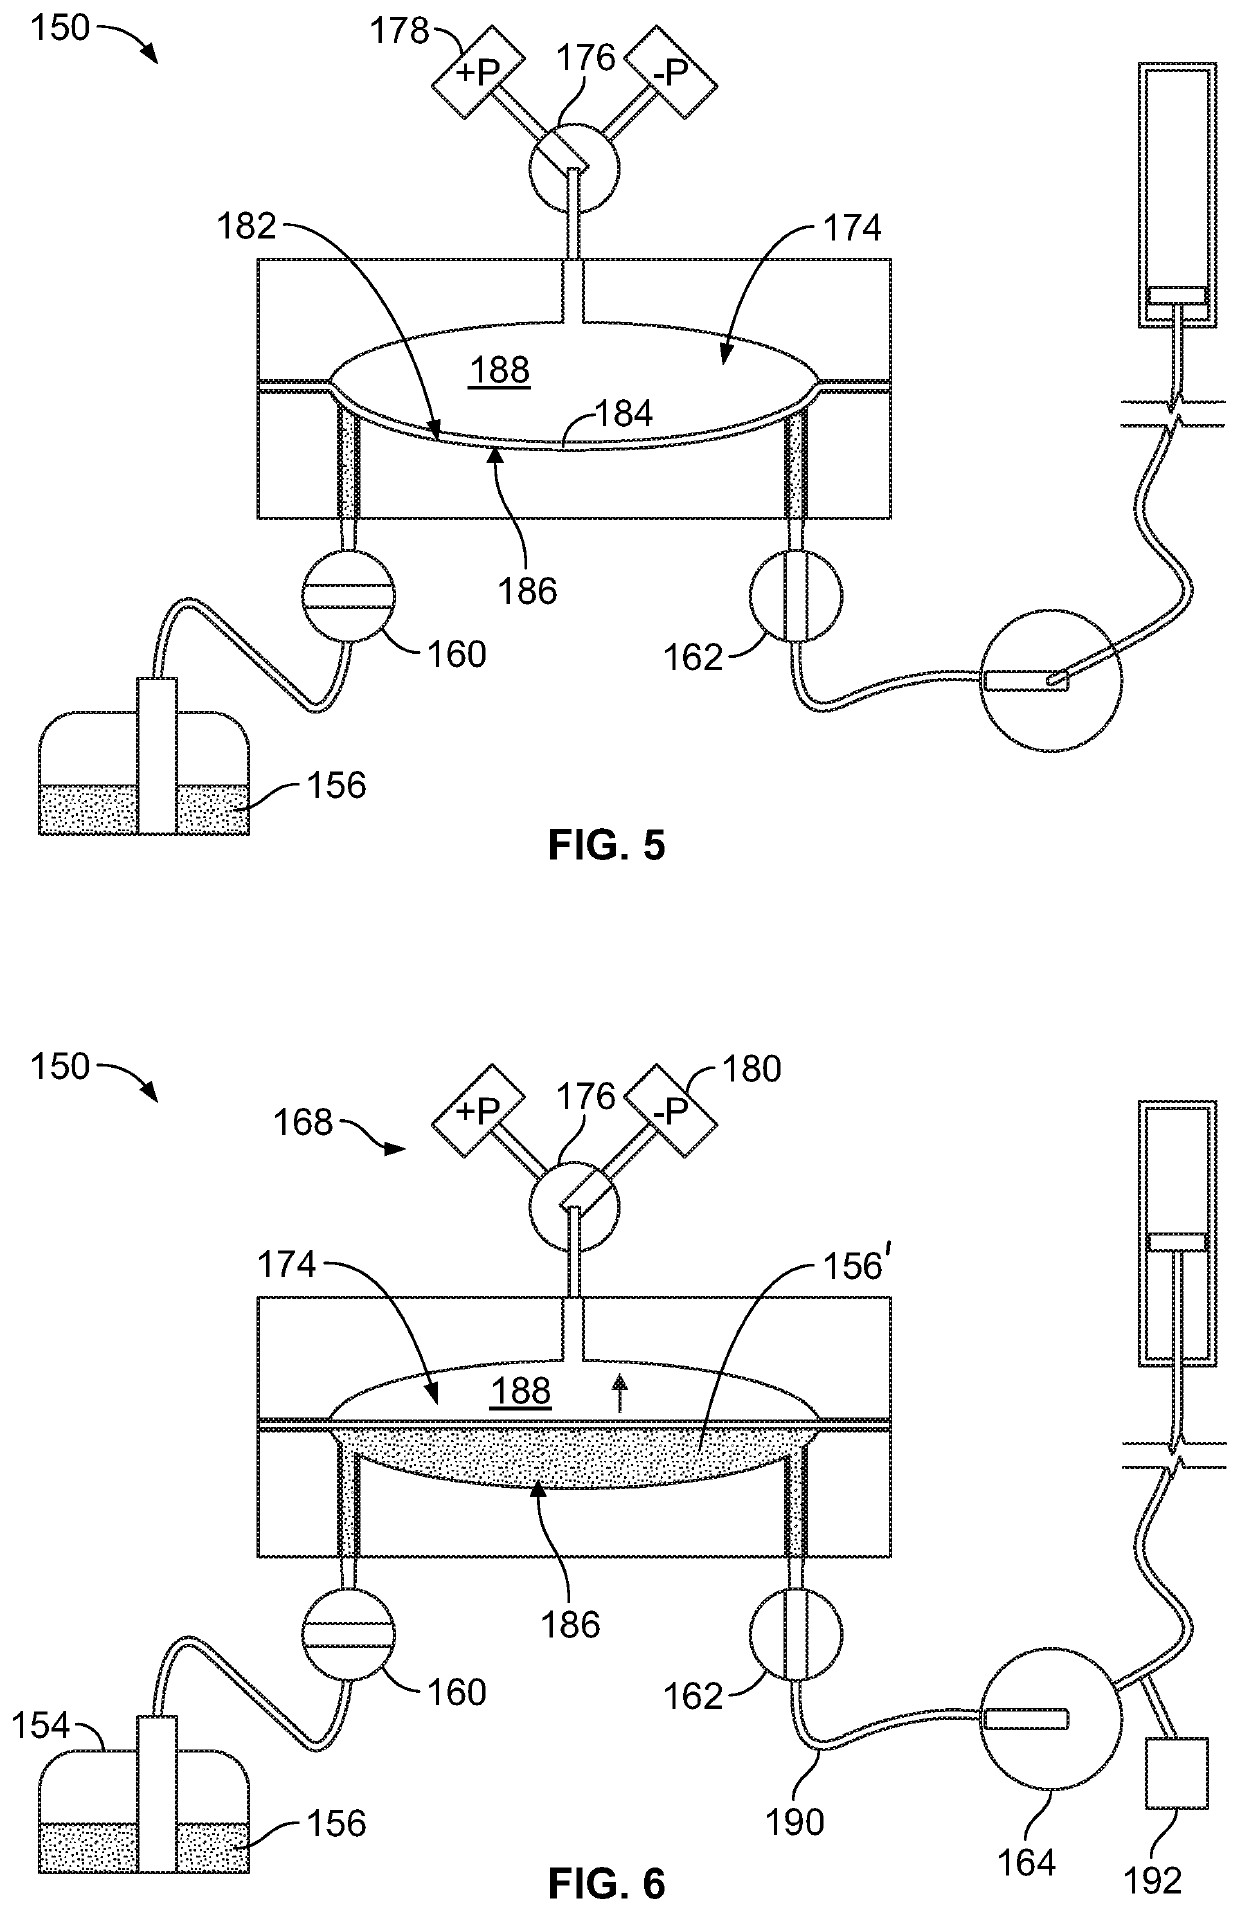 In-line pressure accumulator and flow-control system for biological or chemical assays